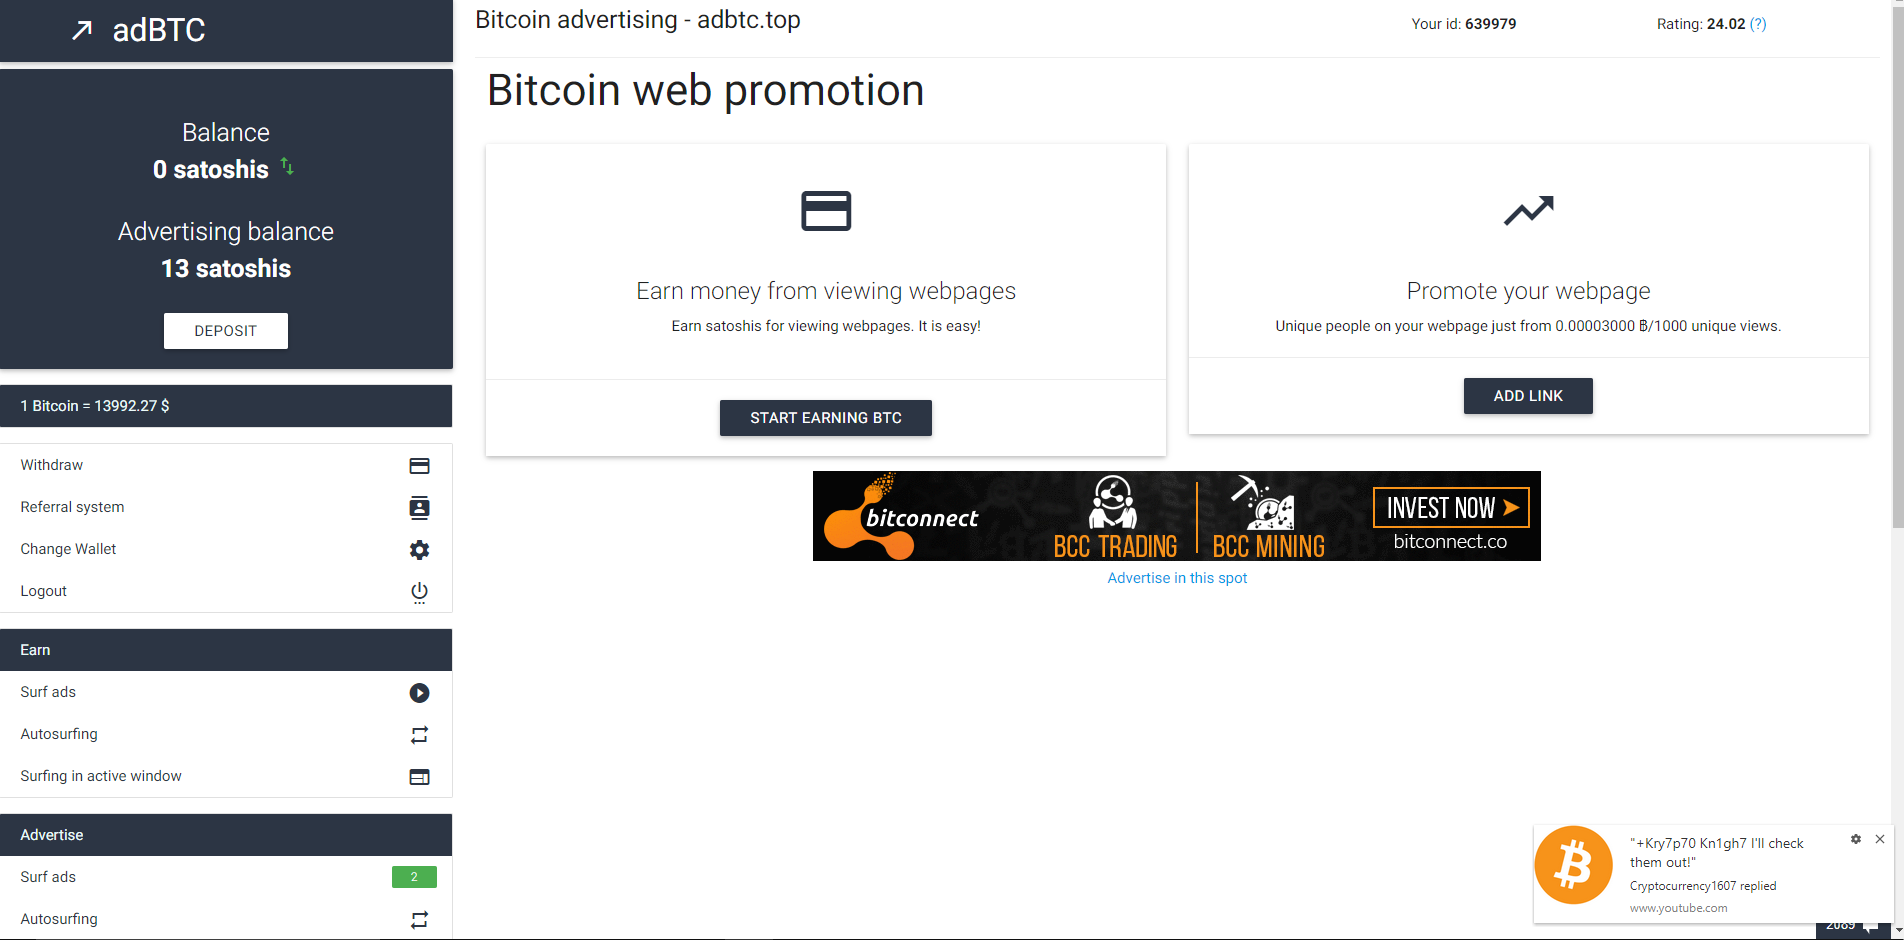 How To Get Referrals For Bitcoin - Free Bitcoin Miner ...